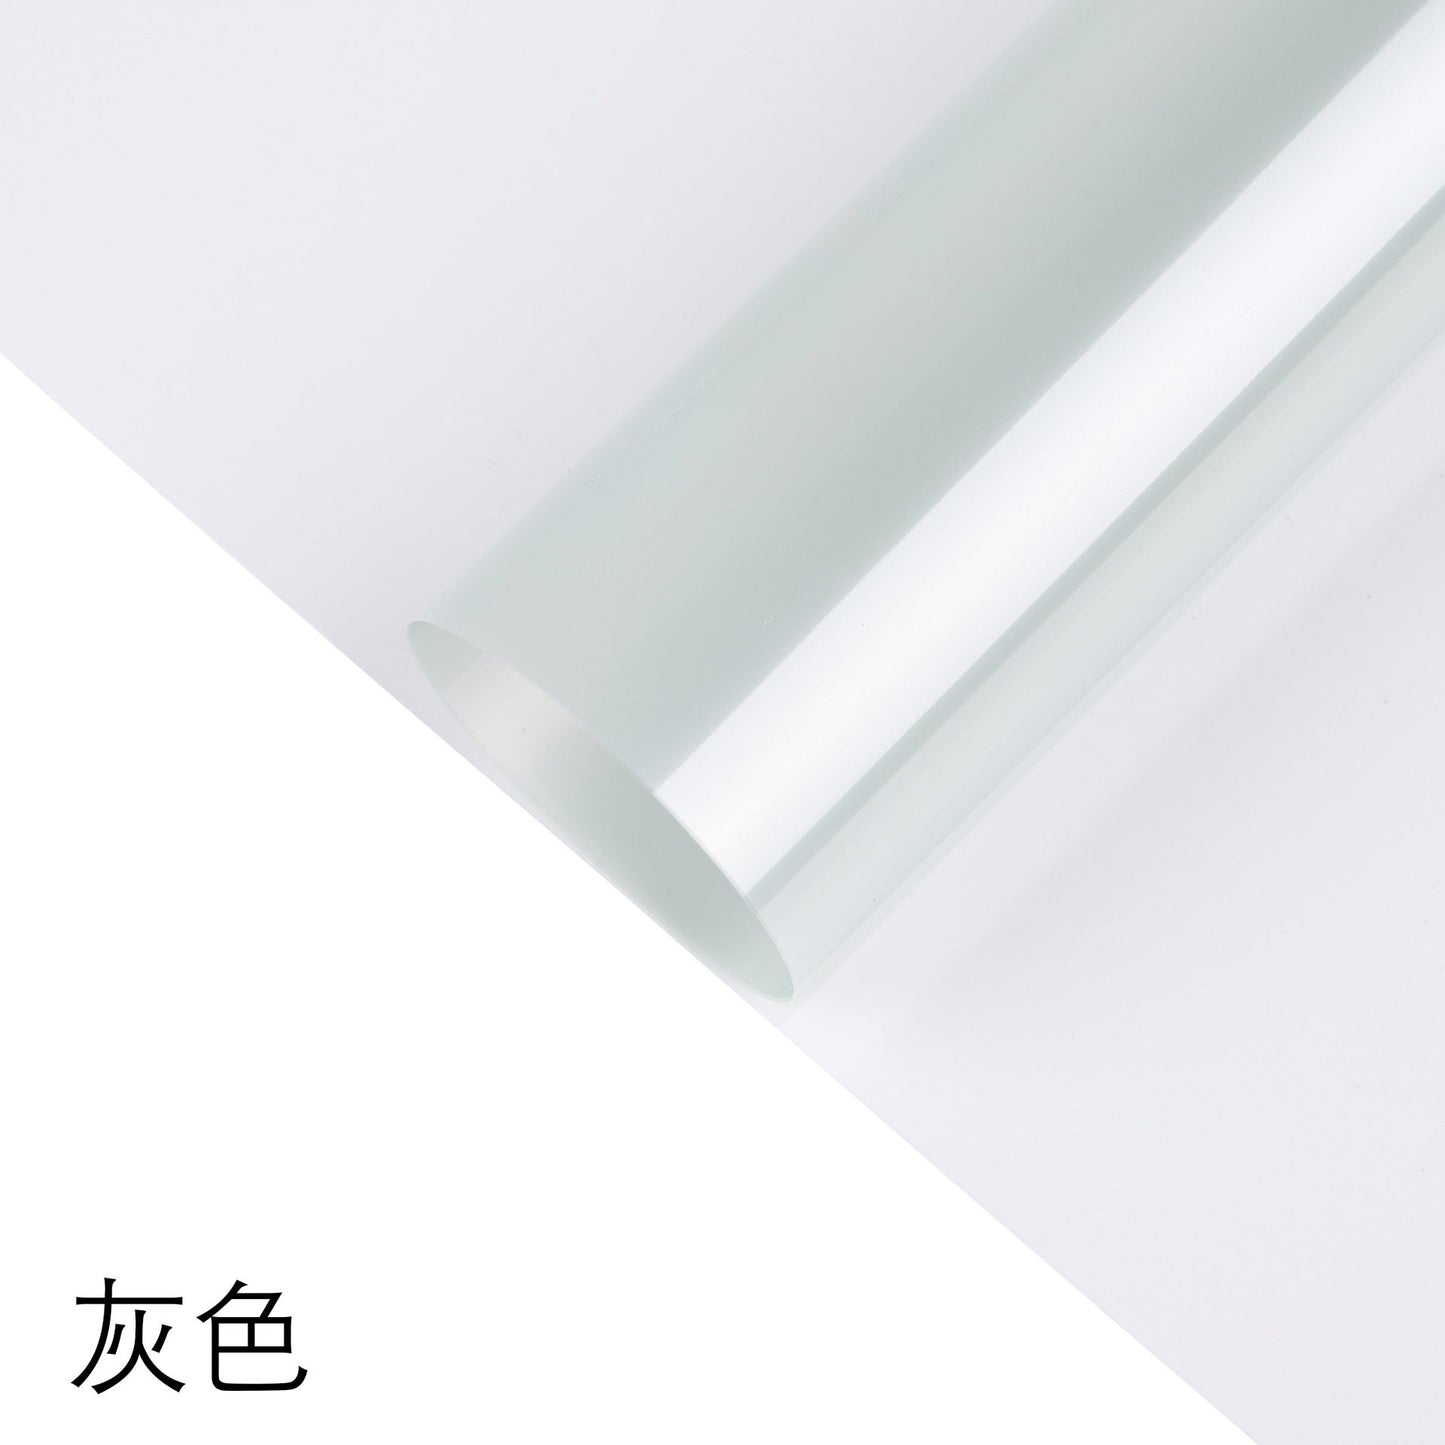 Opp Floral Paper Semi Transparent Glass Paper,22.8*22.8 Inch-20 Sheets